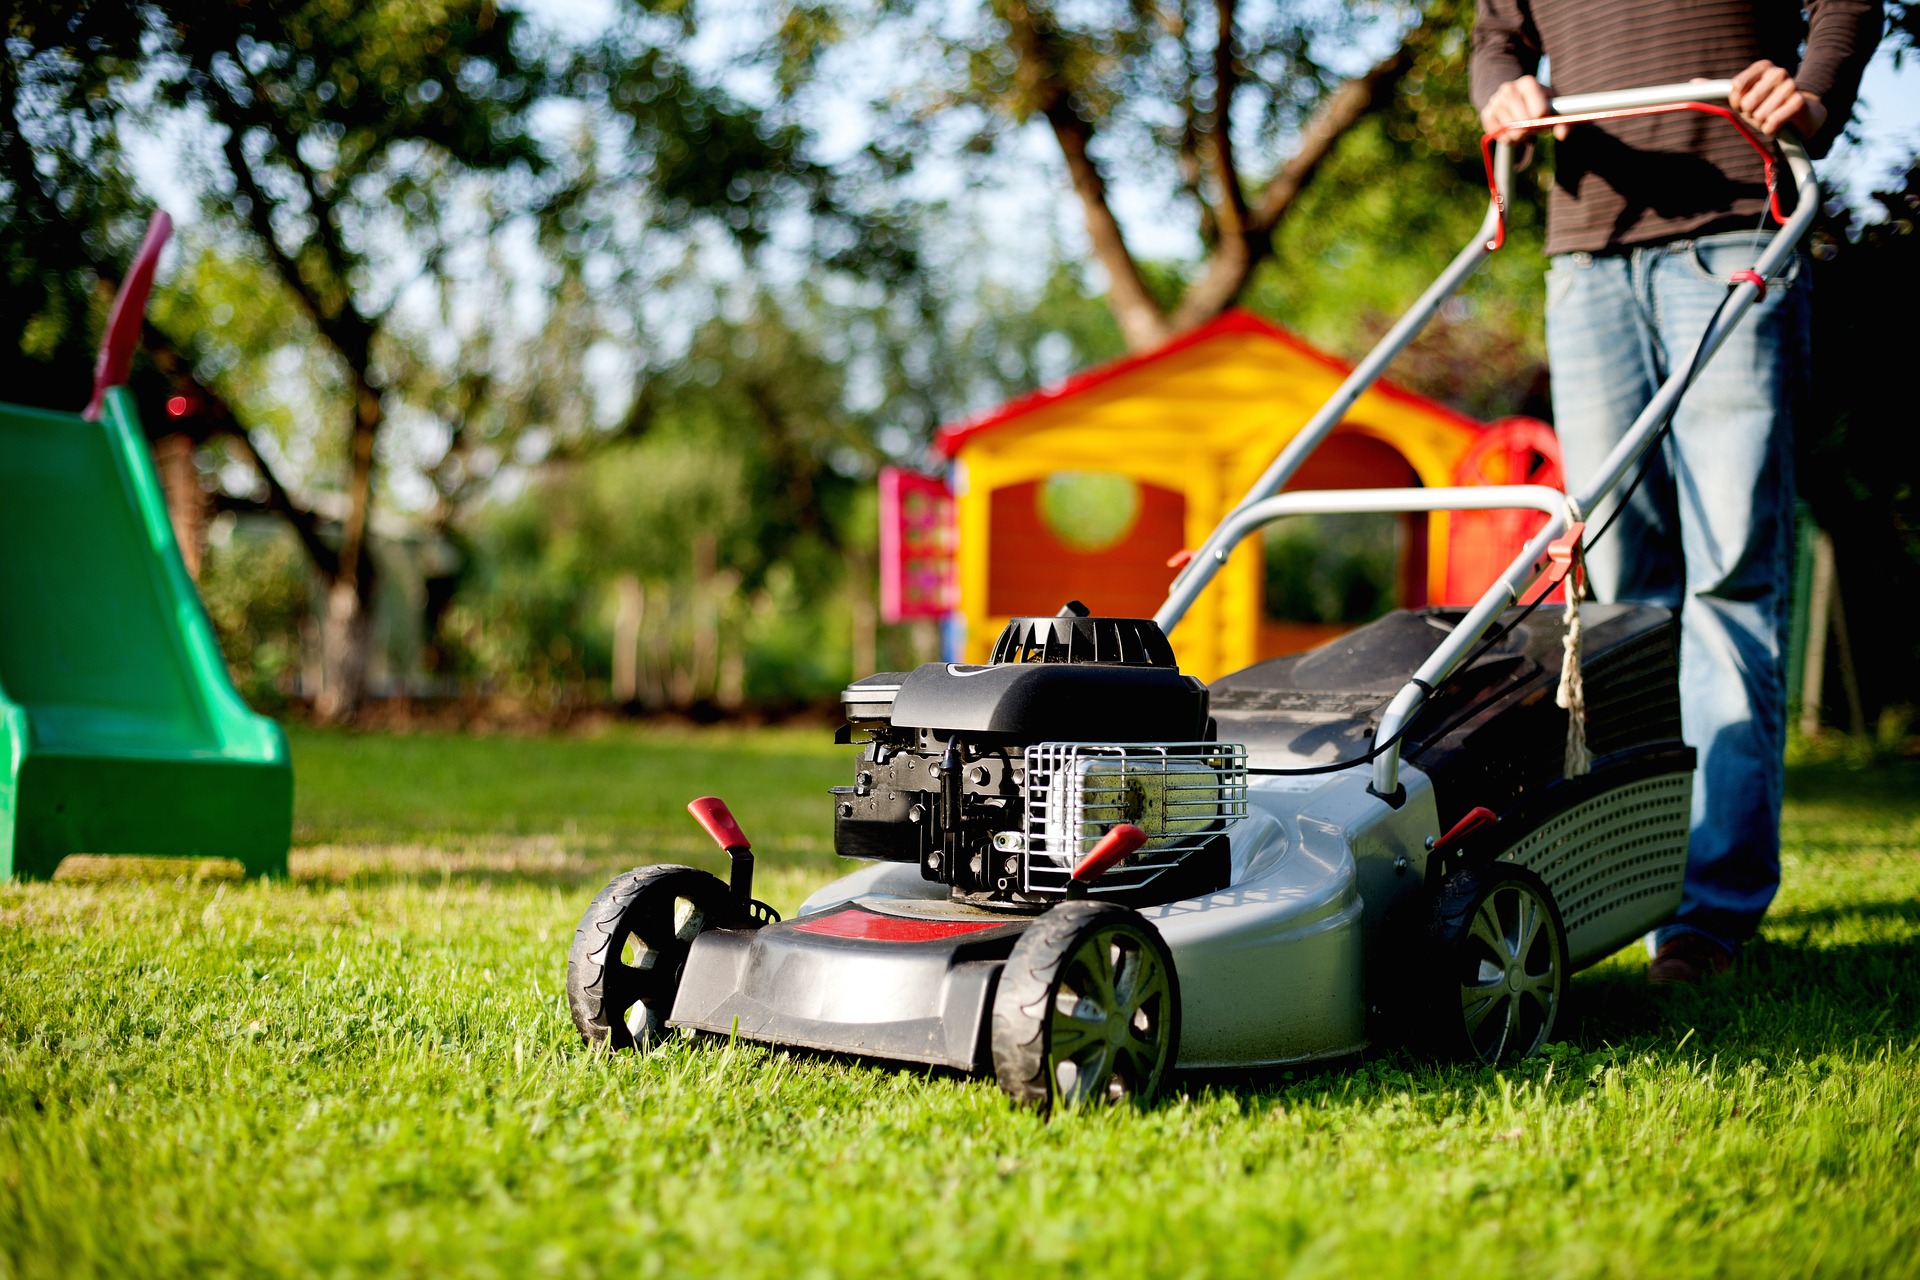 A homeowner demonstrating DIY lawn care by mowing the lawn.